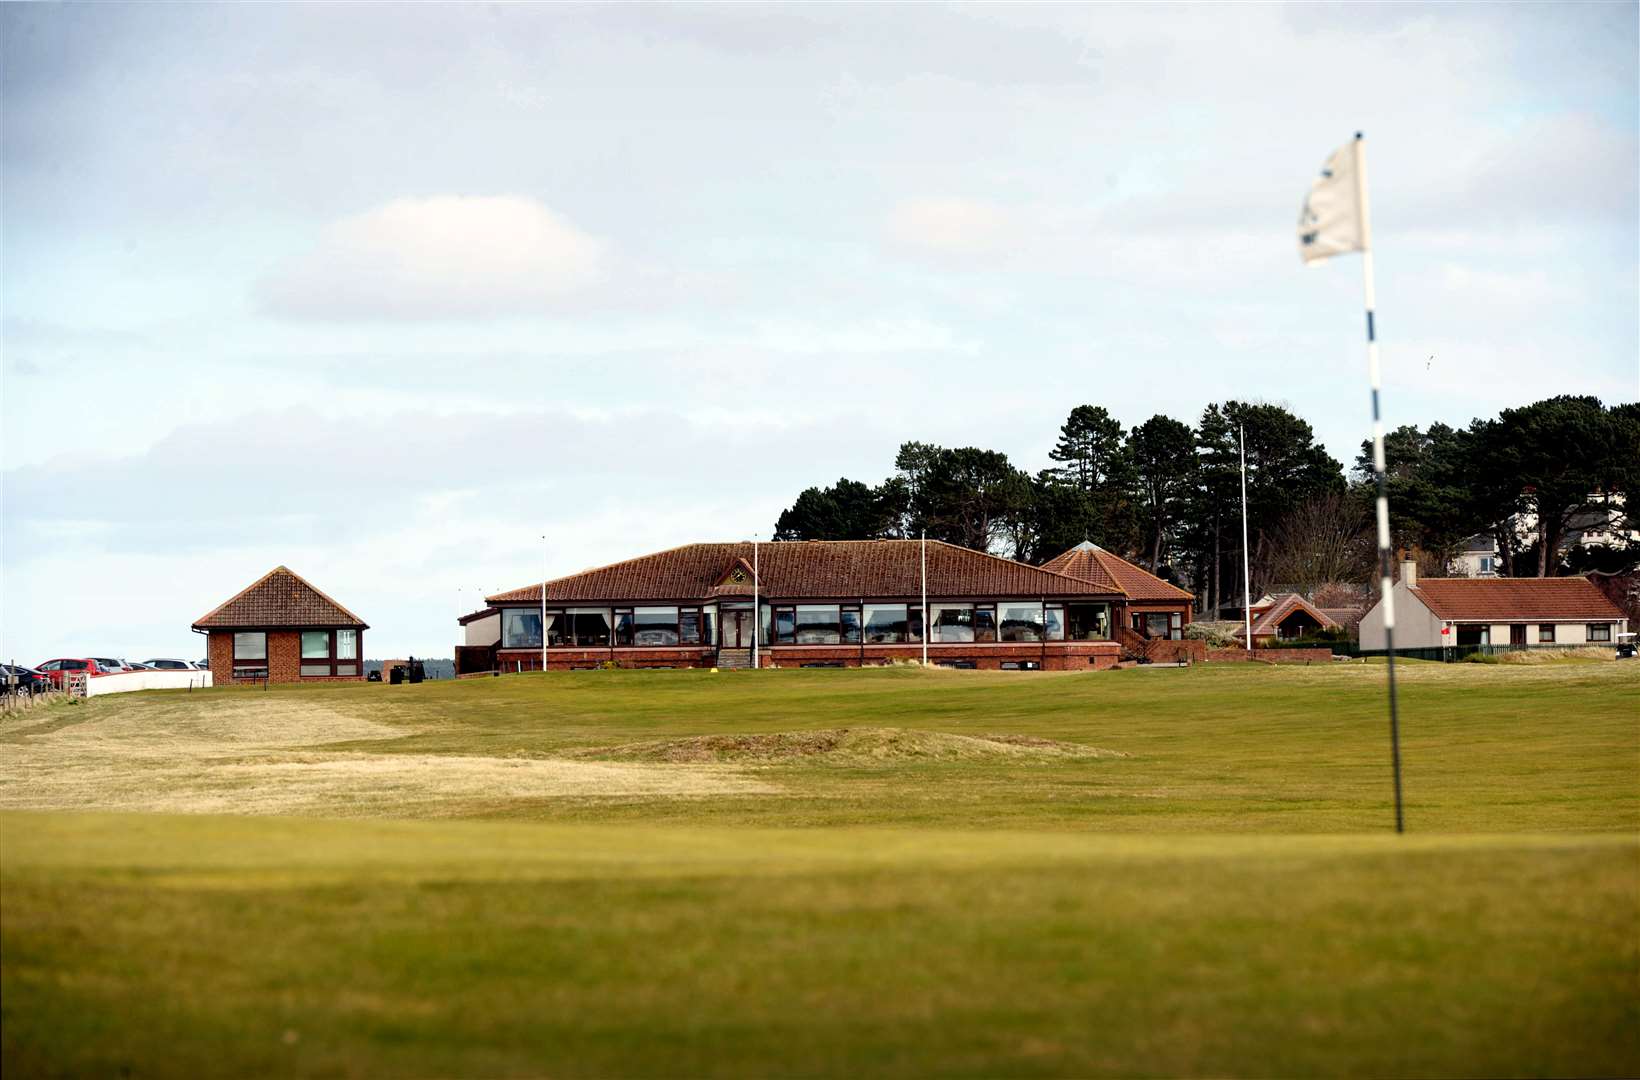 Nairn Golf Club and Nairn Dunbar Golf Club are scheduled to host the Amateur Championship.